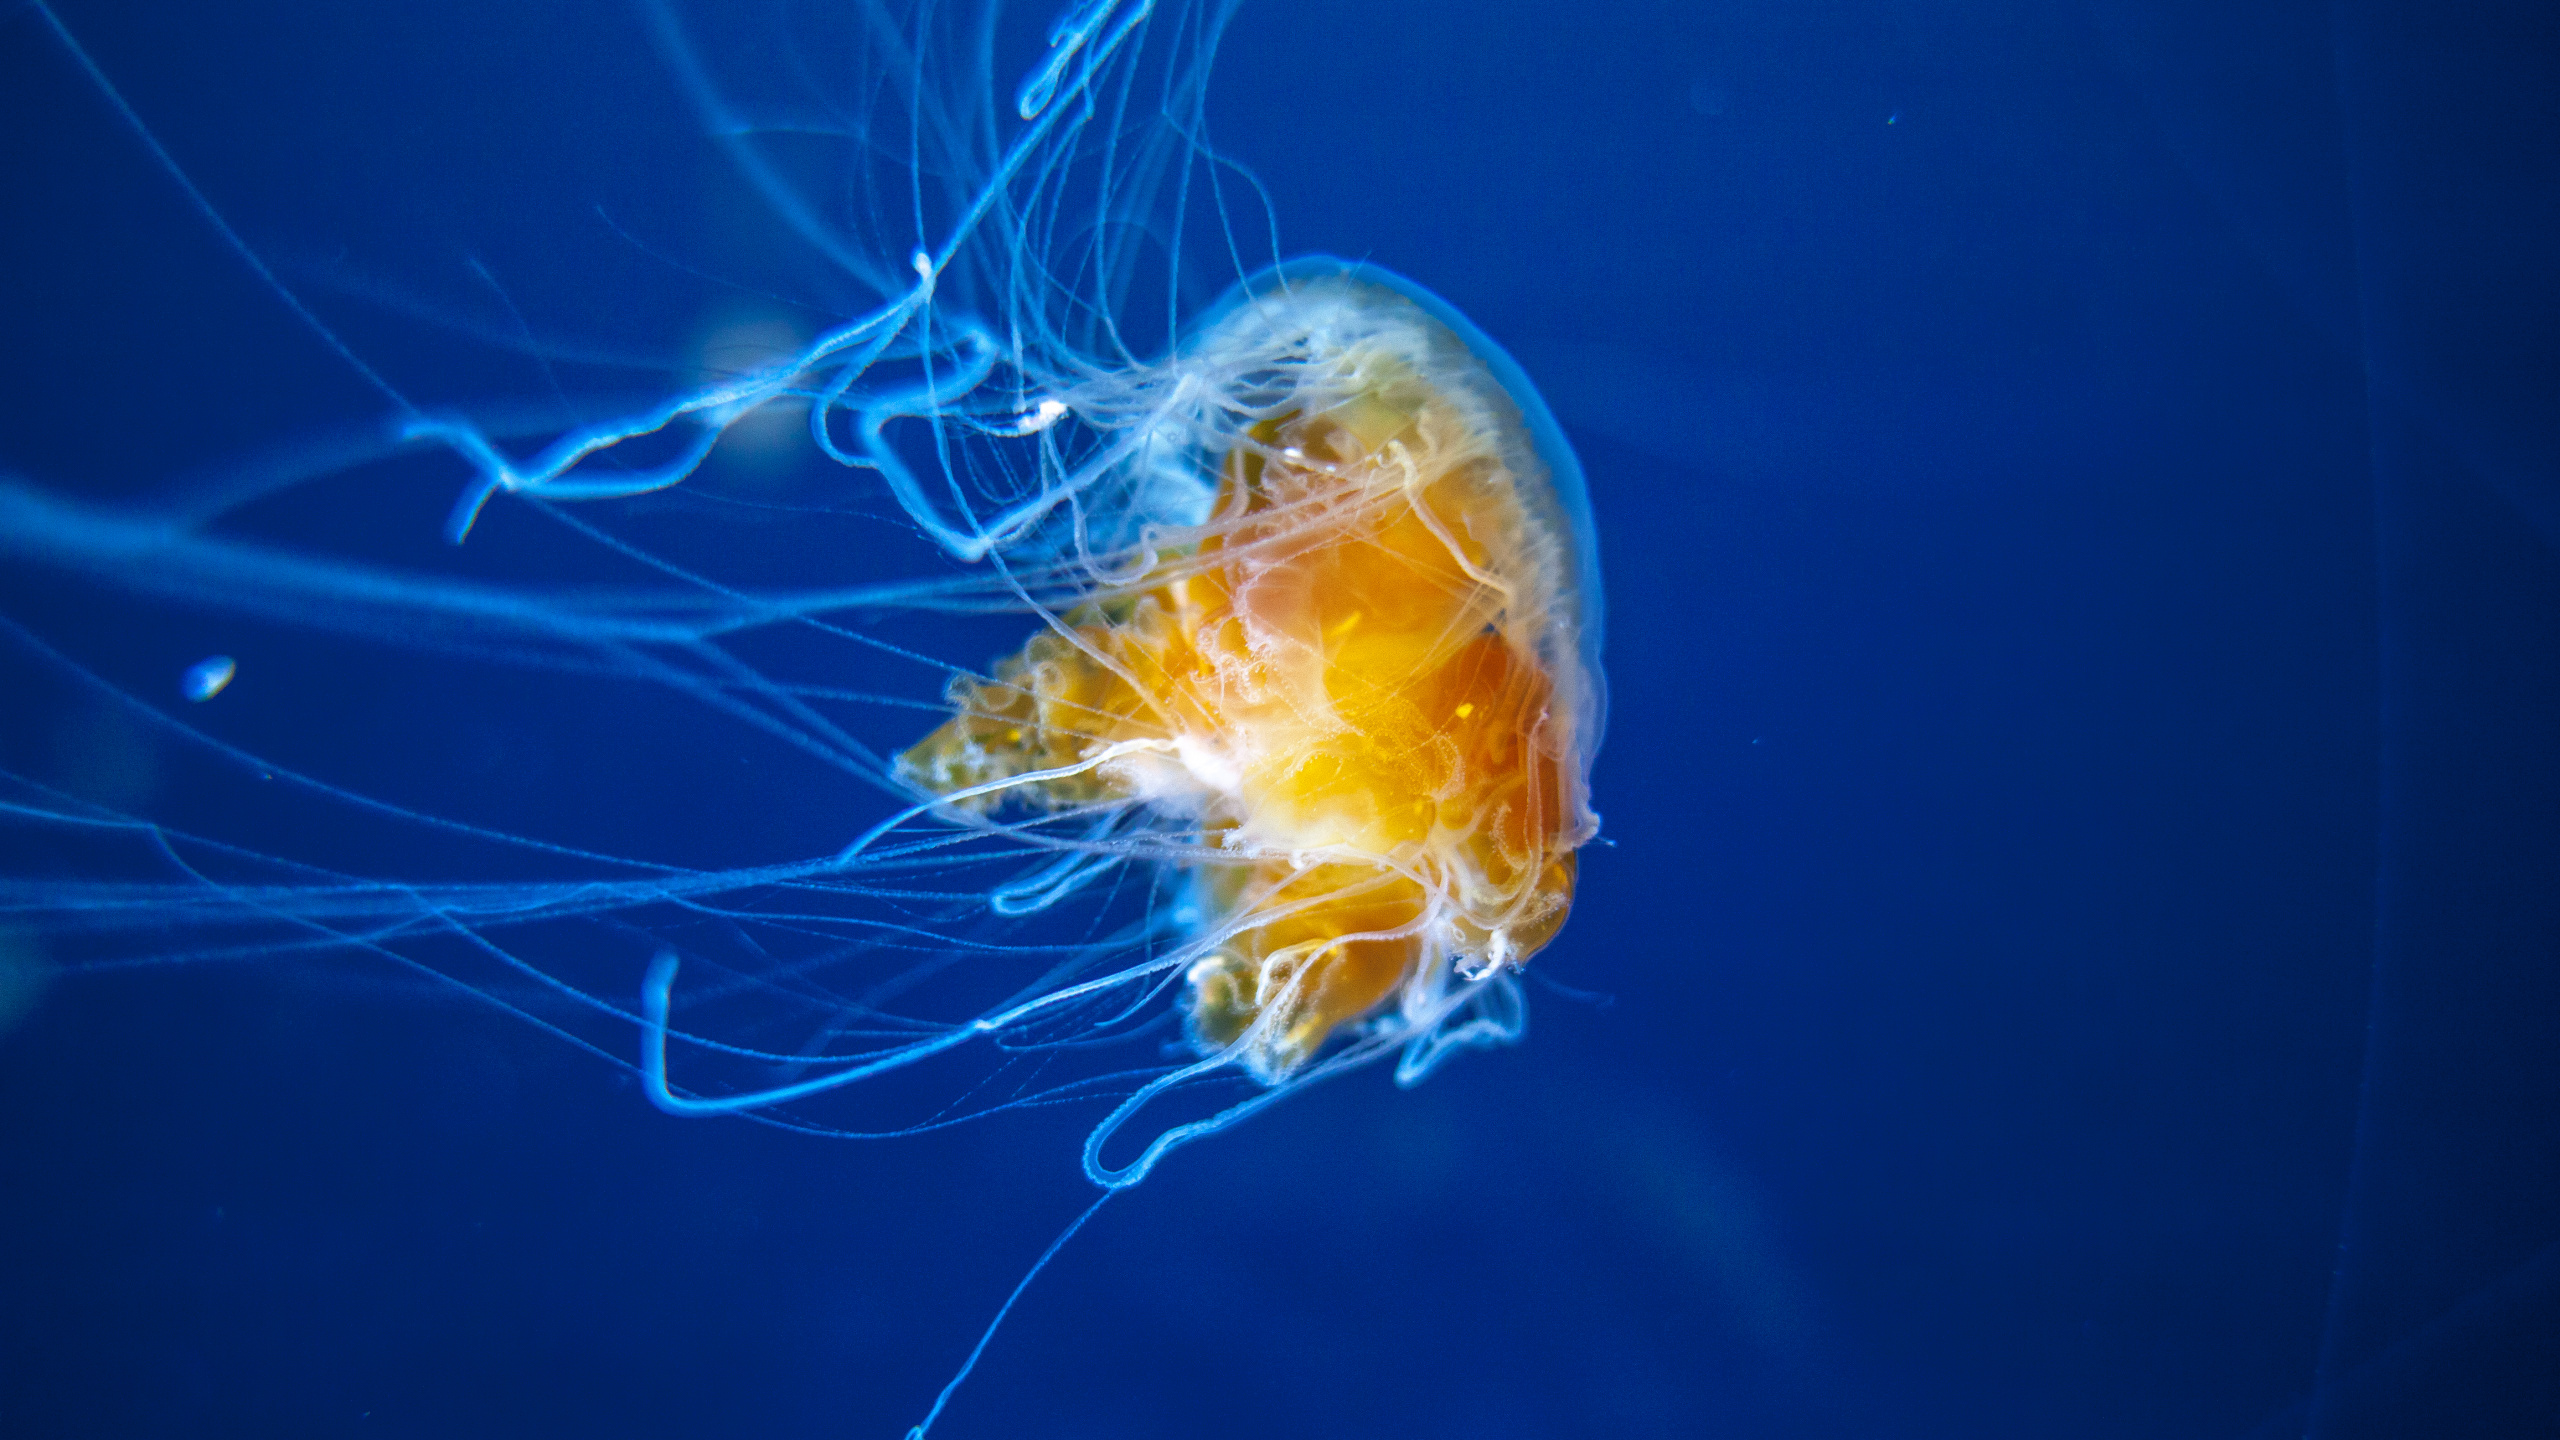 Yellow and White Jellyfish in Blue Water. Wallpaper in 2560x1440 Resolution